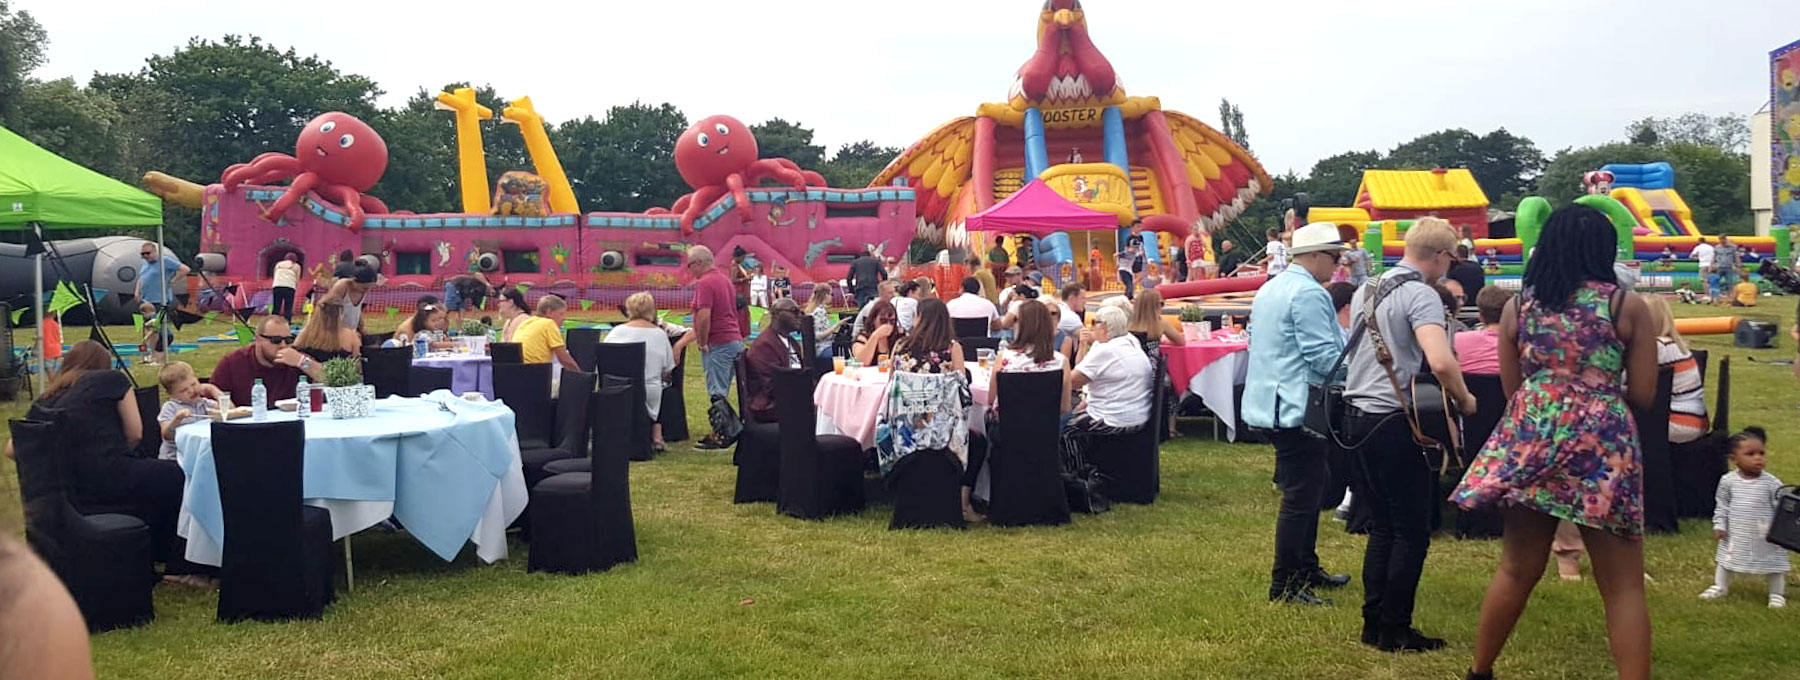 Festival Venue Hire - Essex - Chigwell Marquees